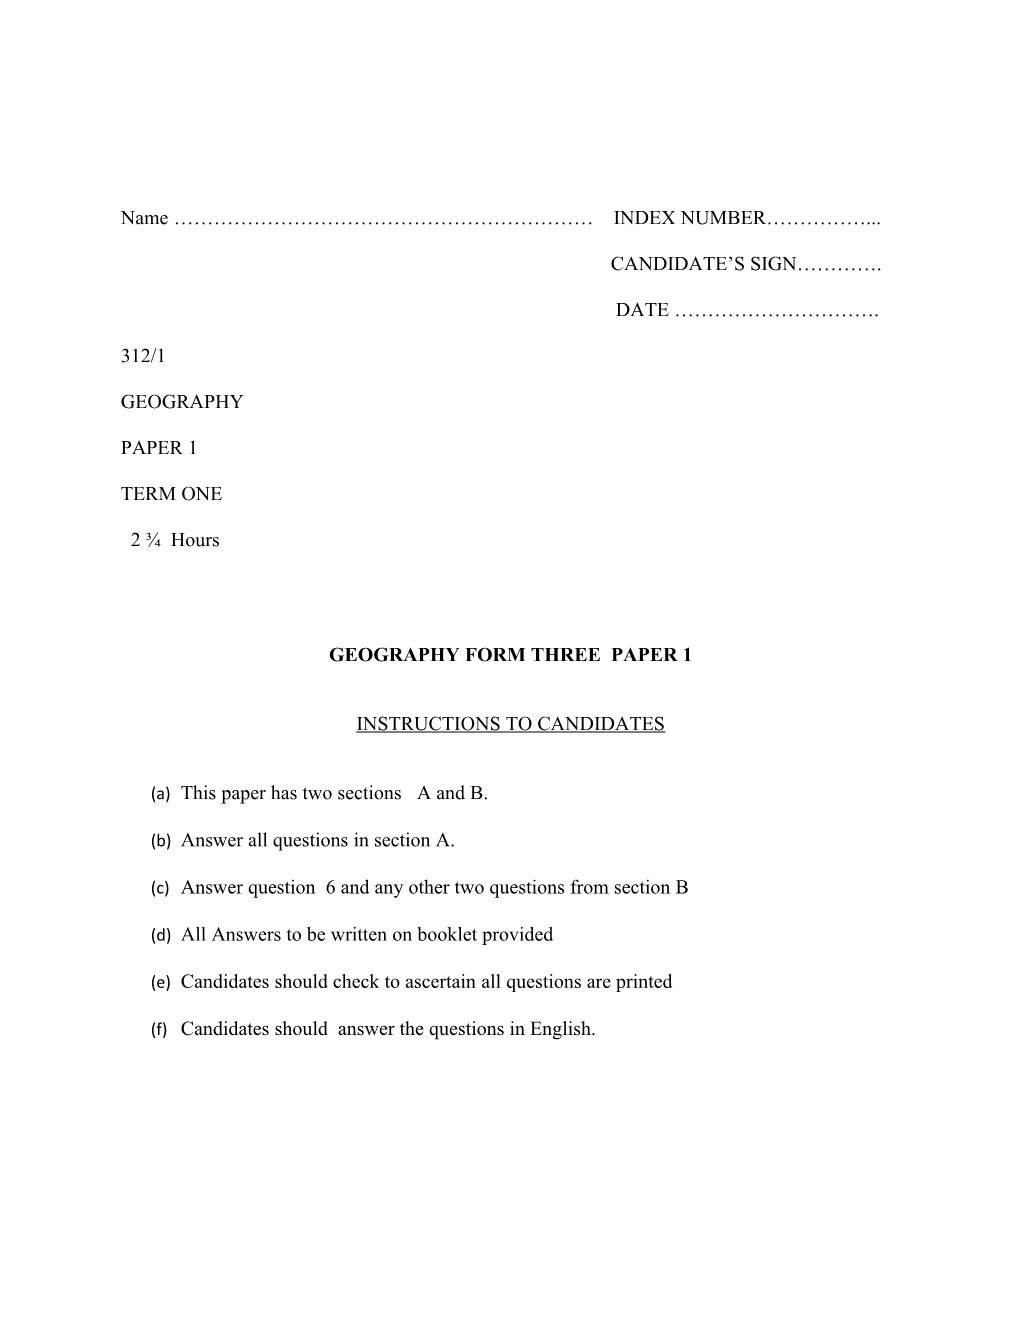 Geography Form Three Paper 1